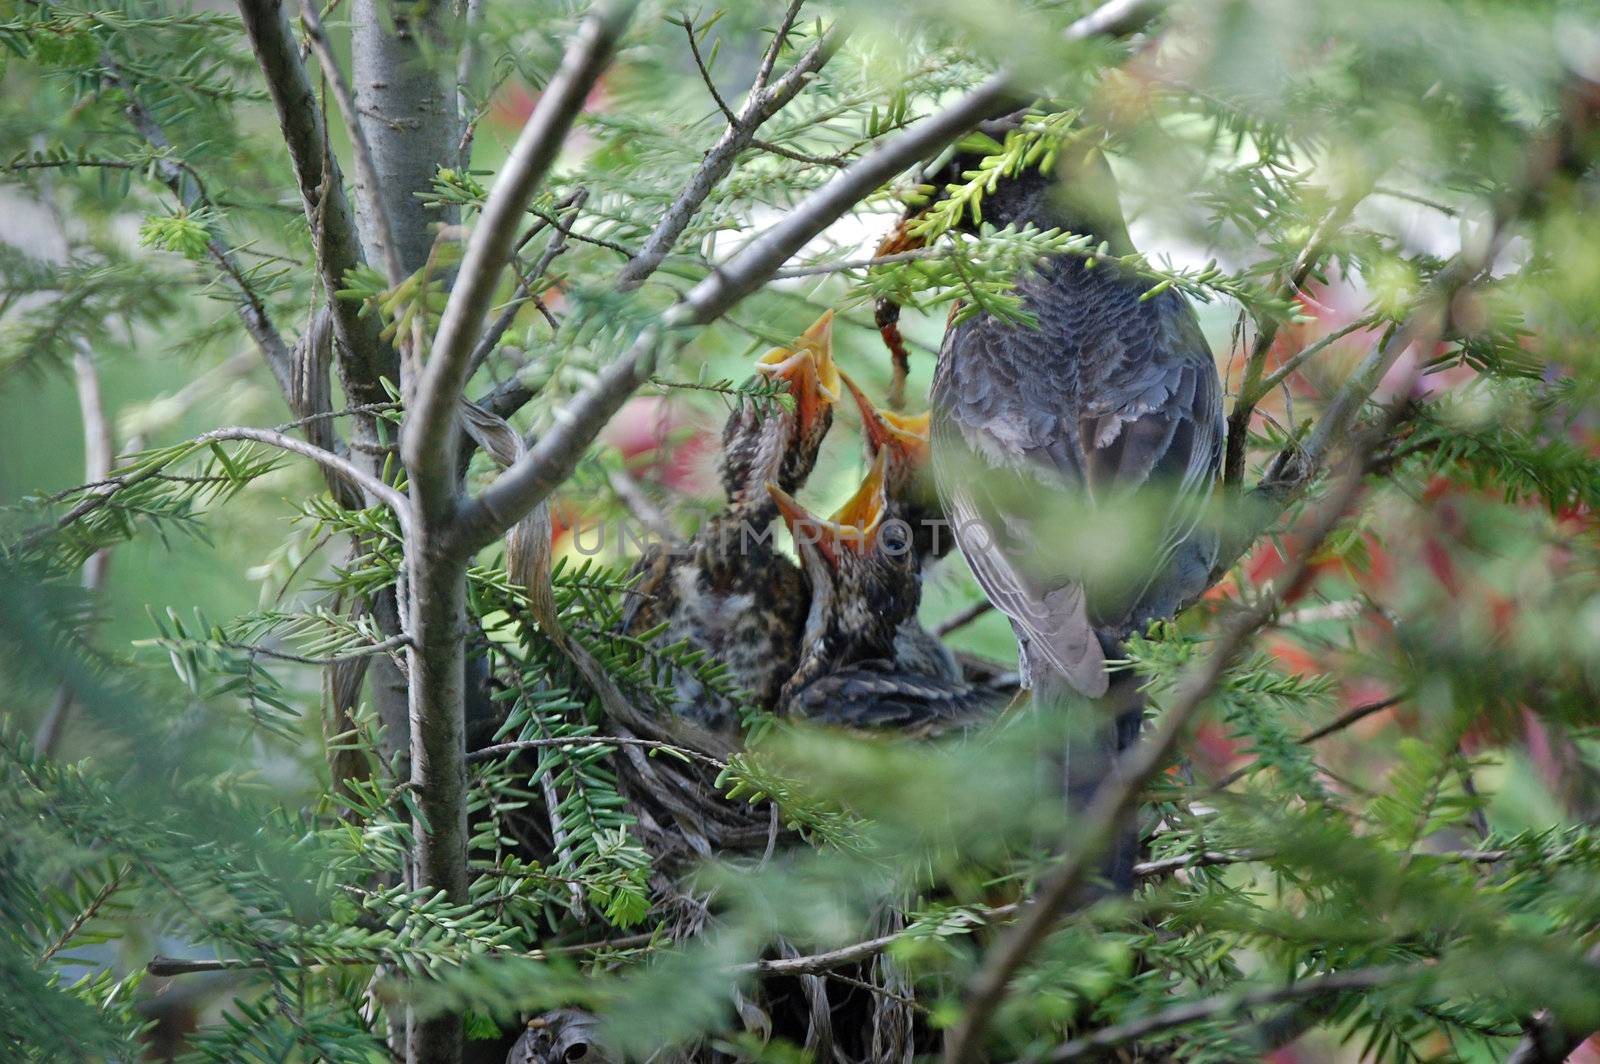 Baby birds being fed by RefocusPhoto